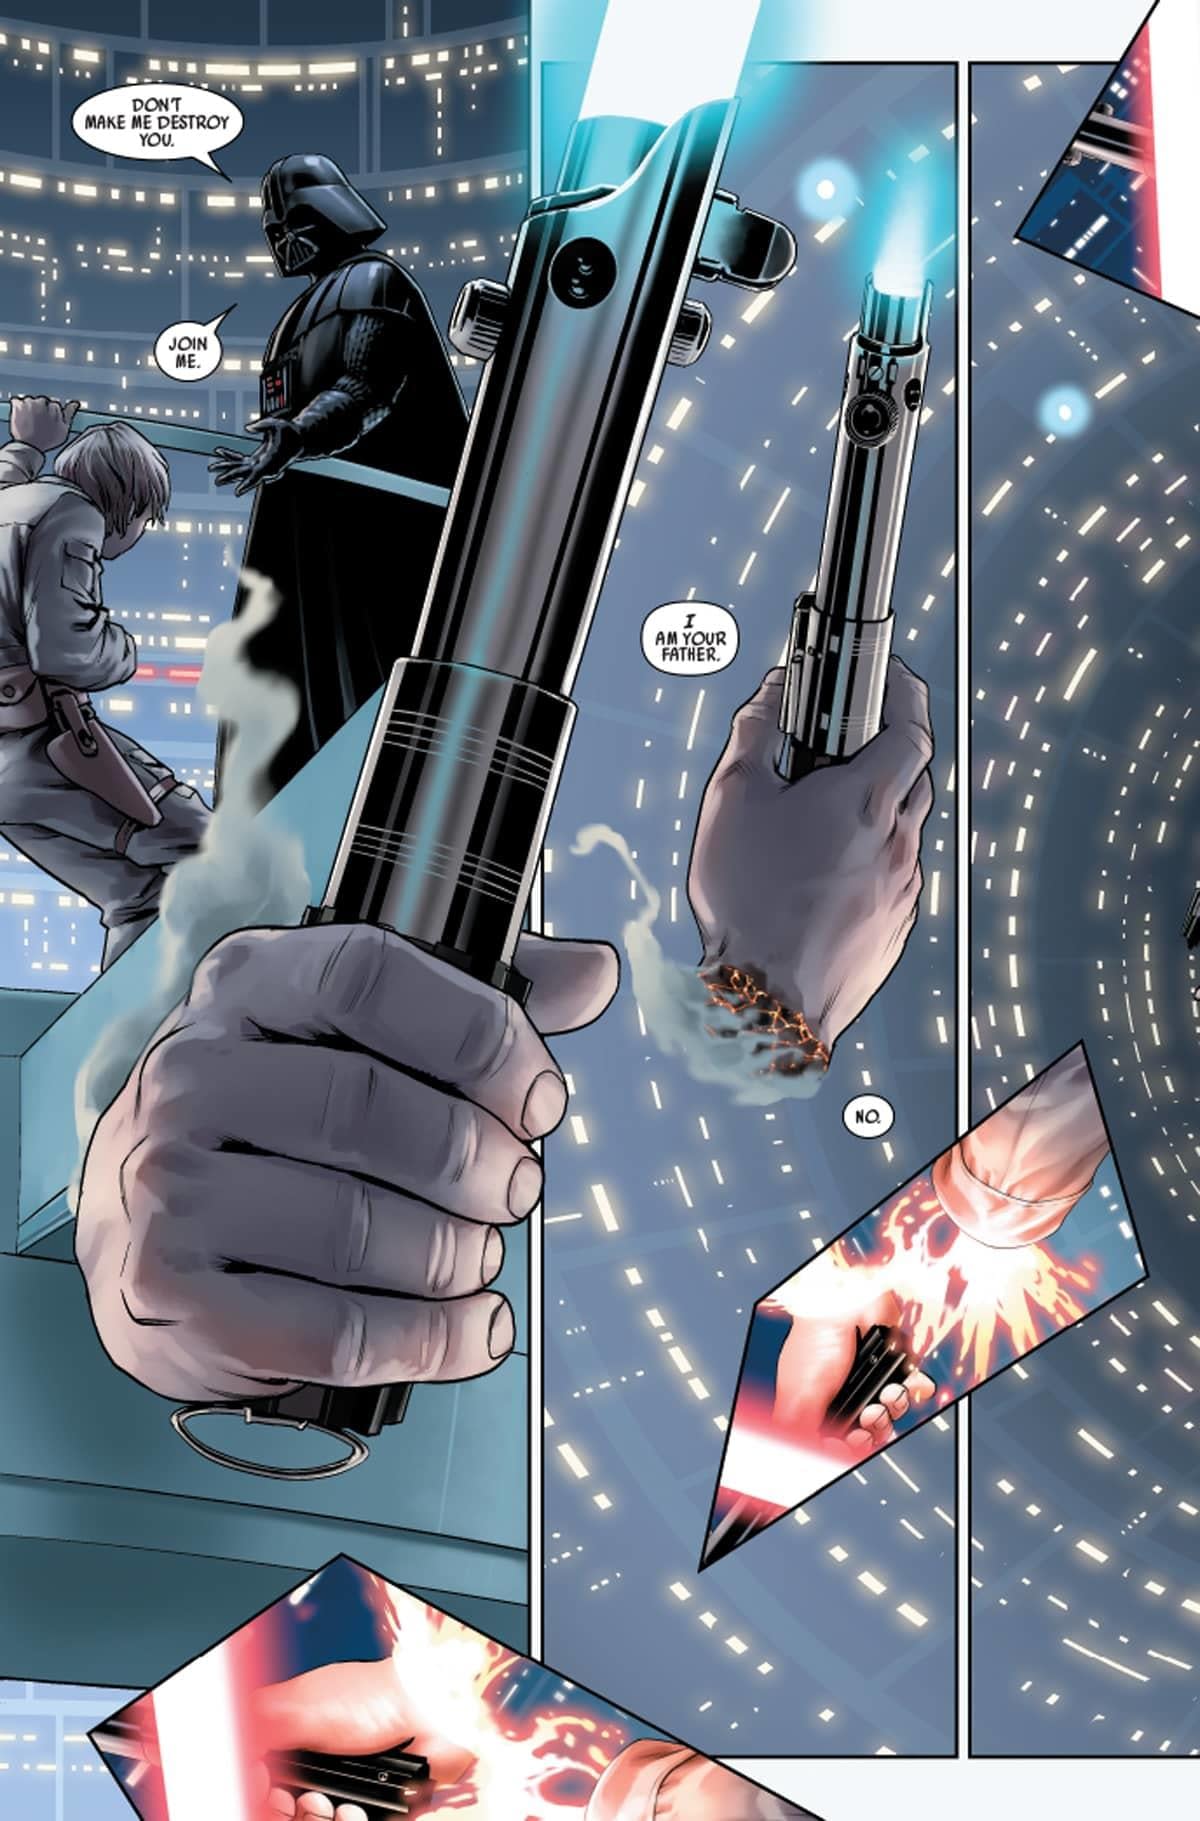 First Look at Marvel's New Star Wars #1 Shows Immediate Aftermath of Empire Strikes Back